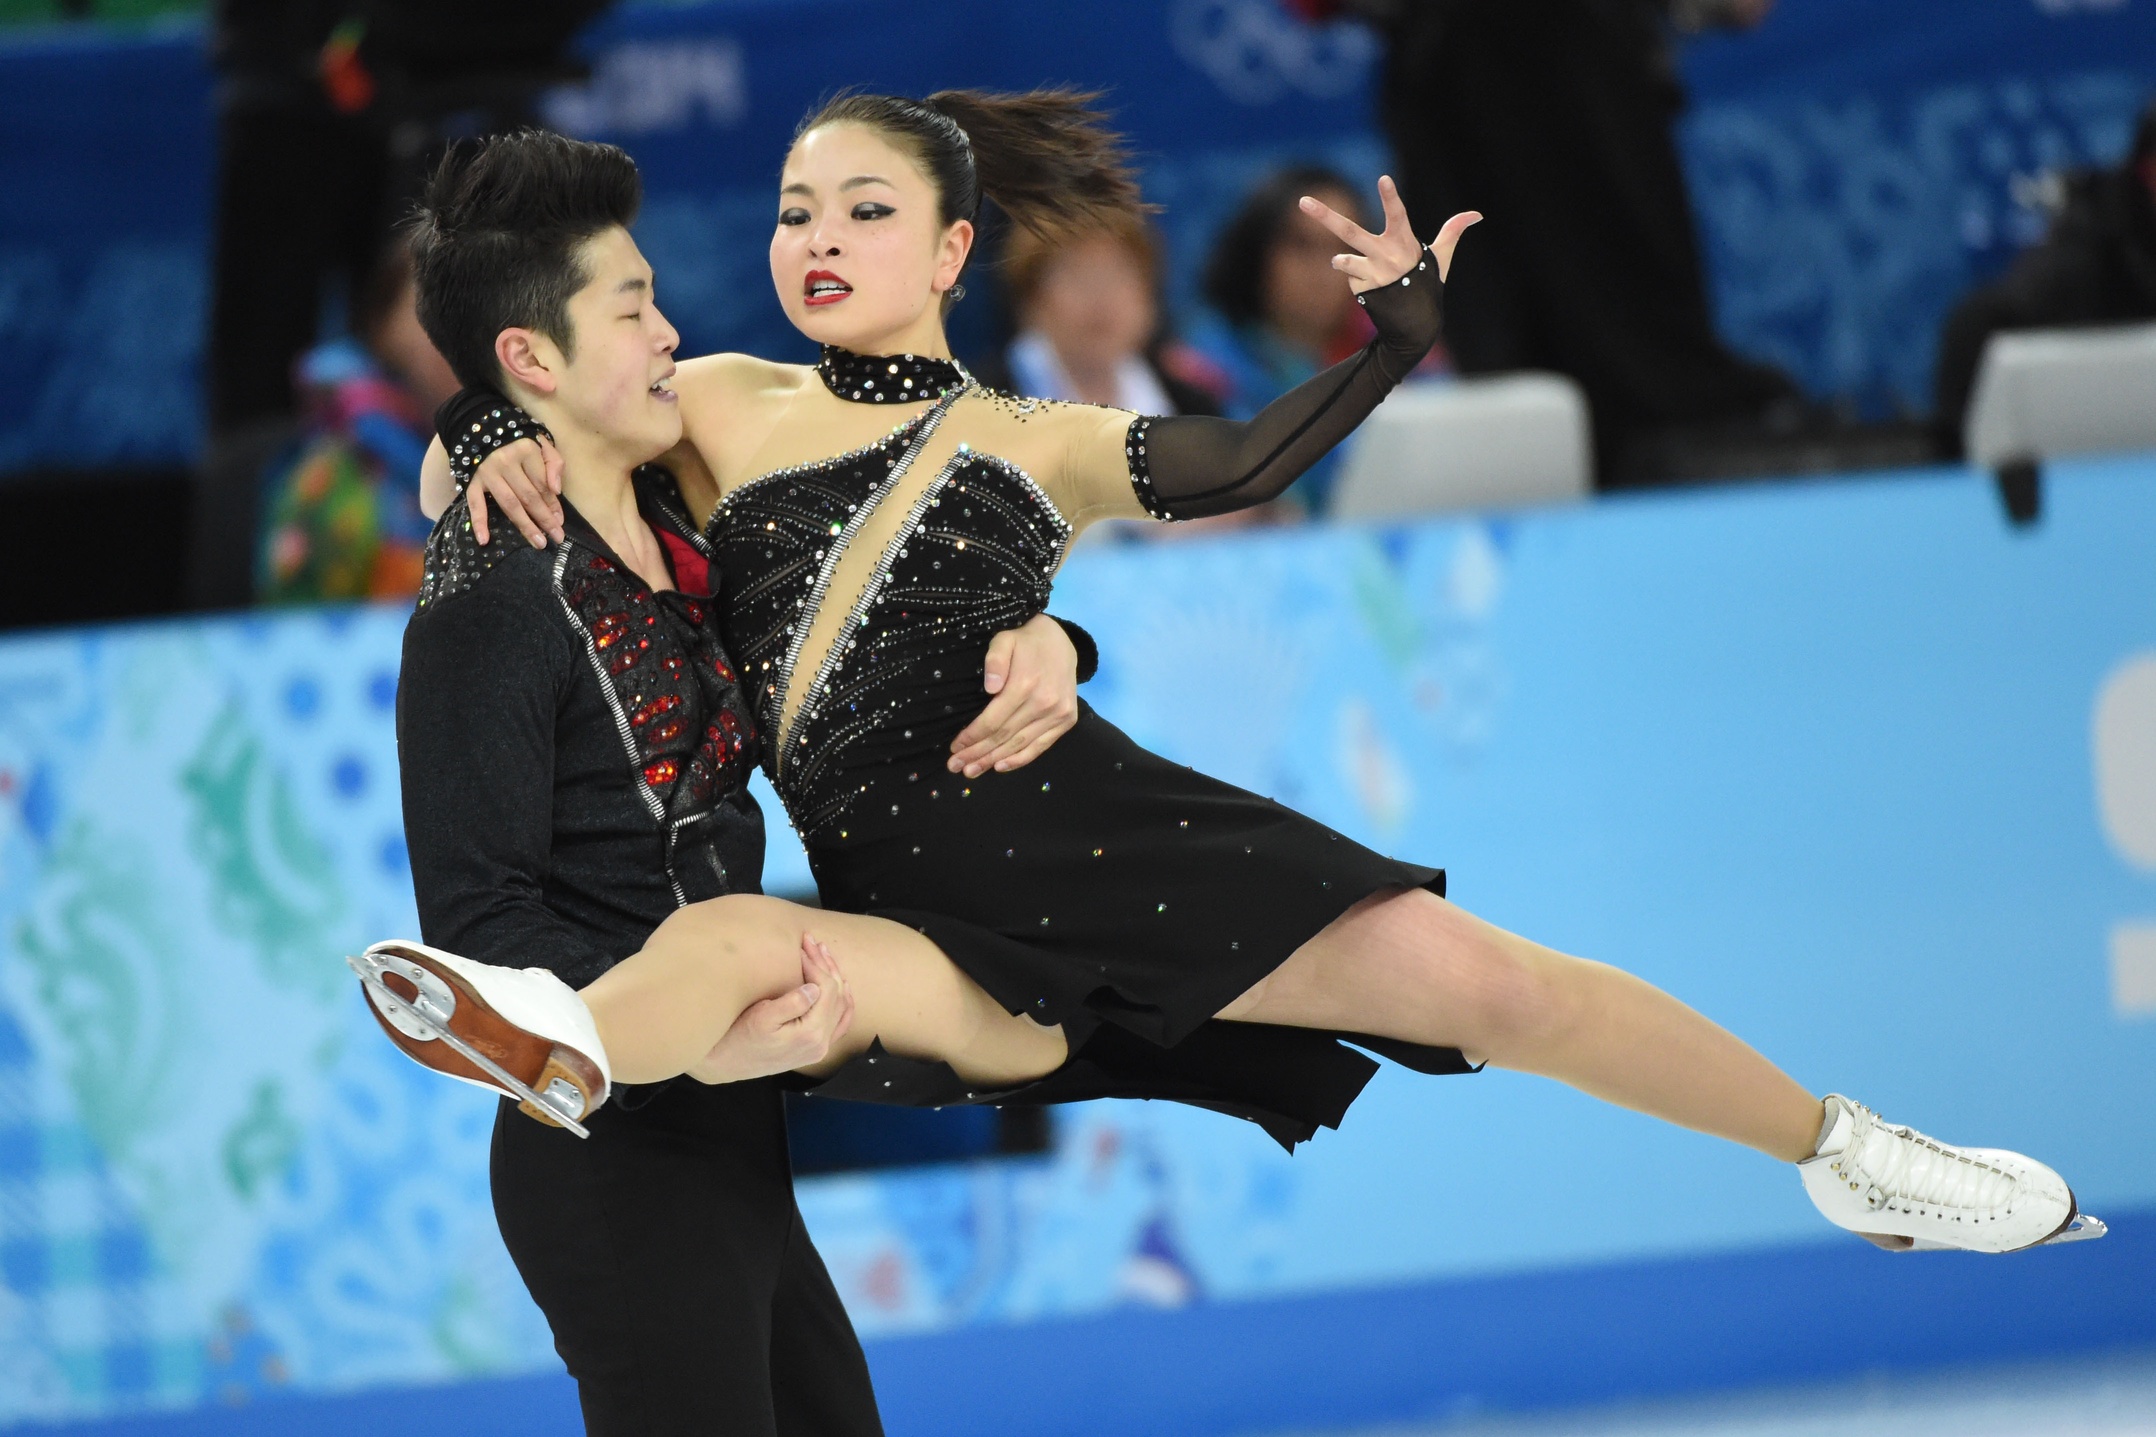 U.S. ice dancers suffer wardrobe malfunction during competition | For ...